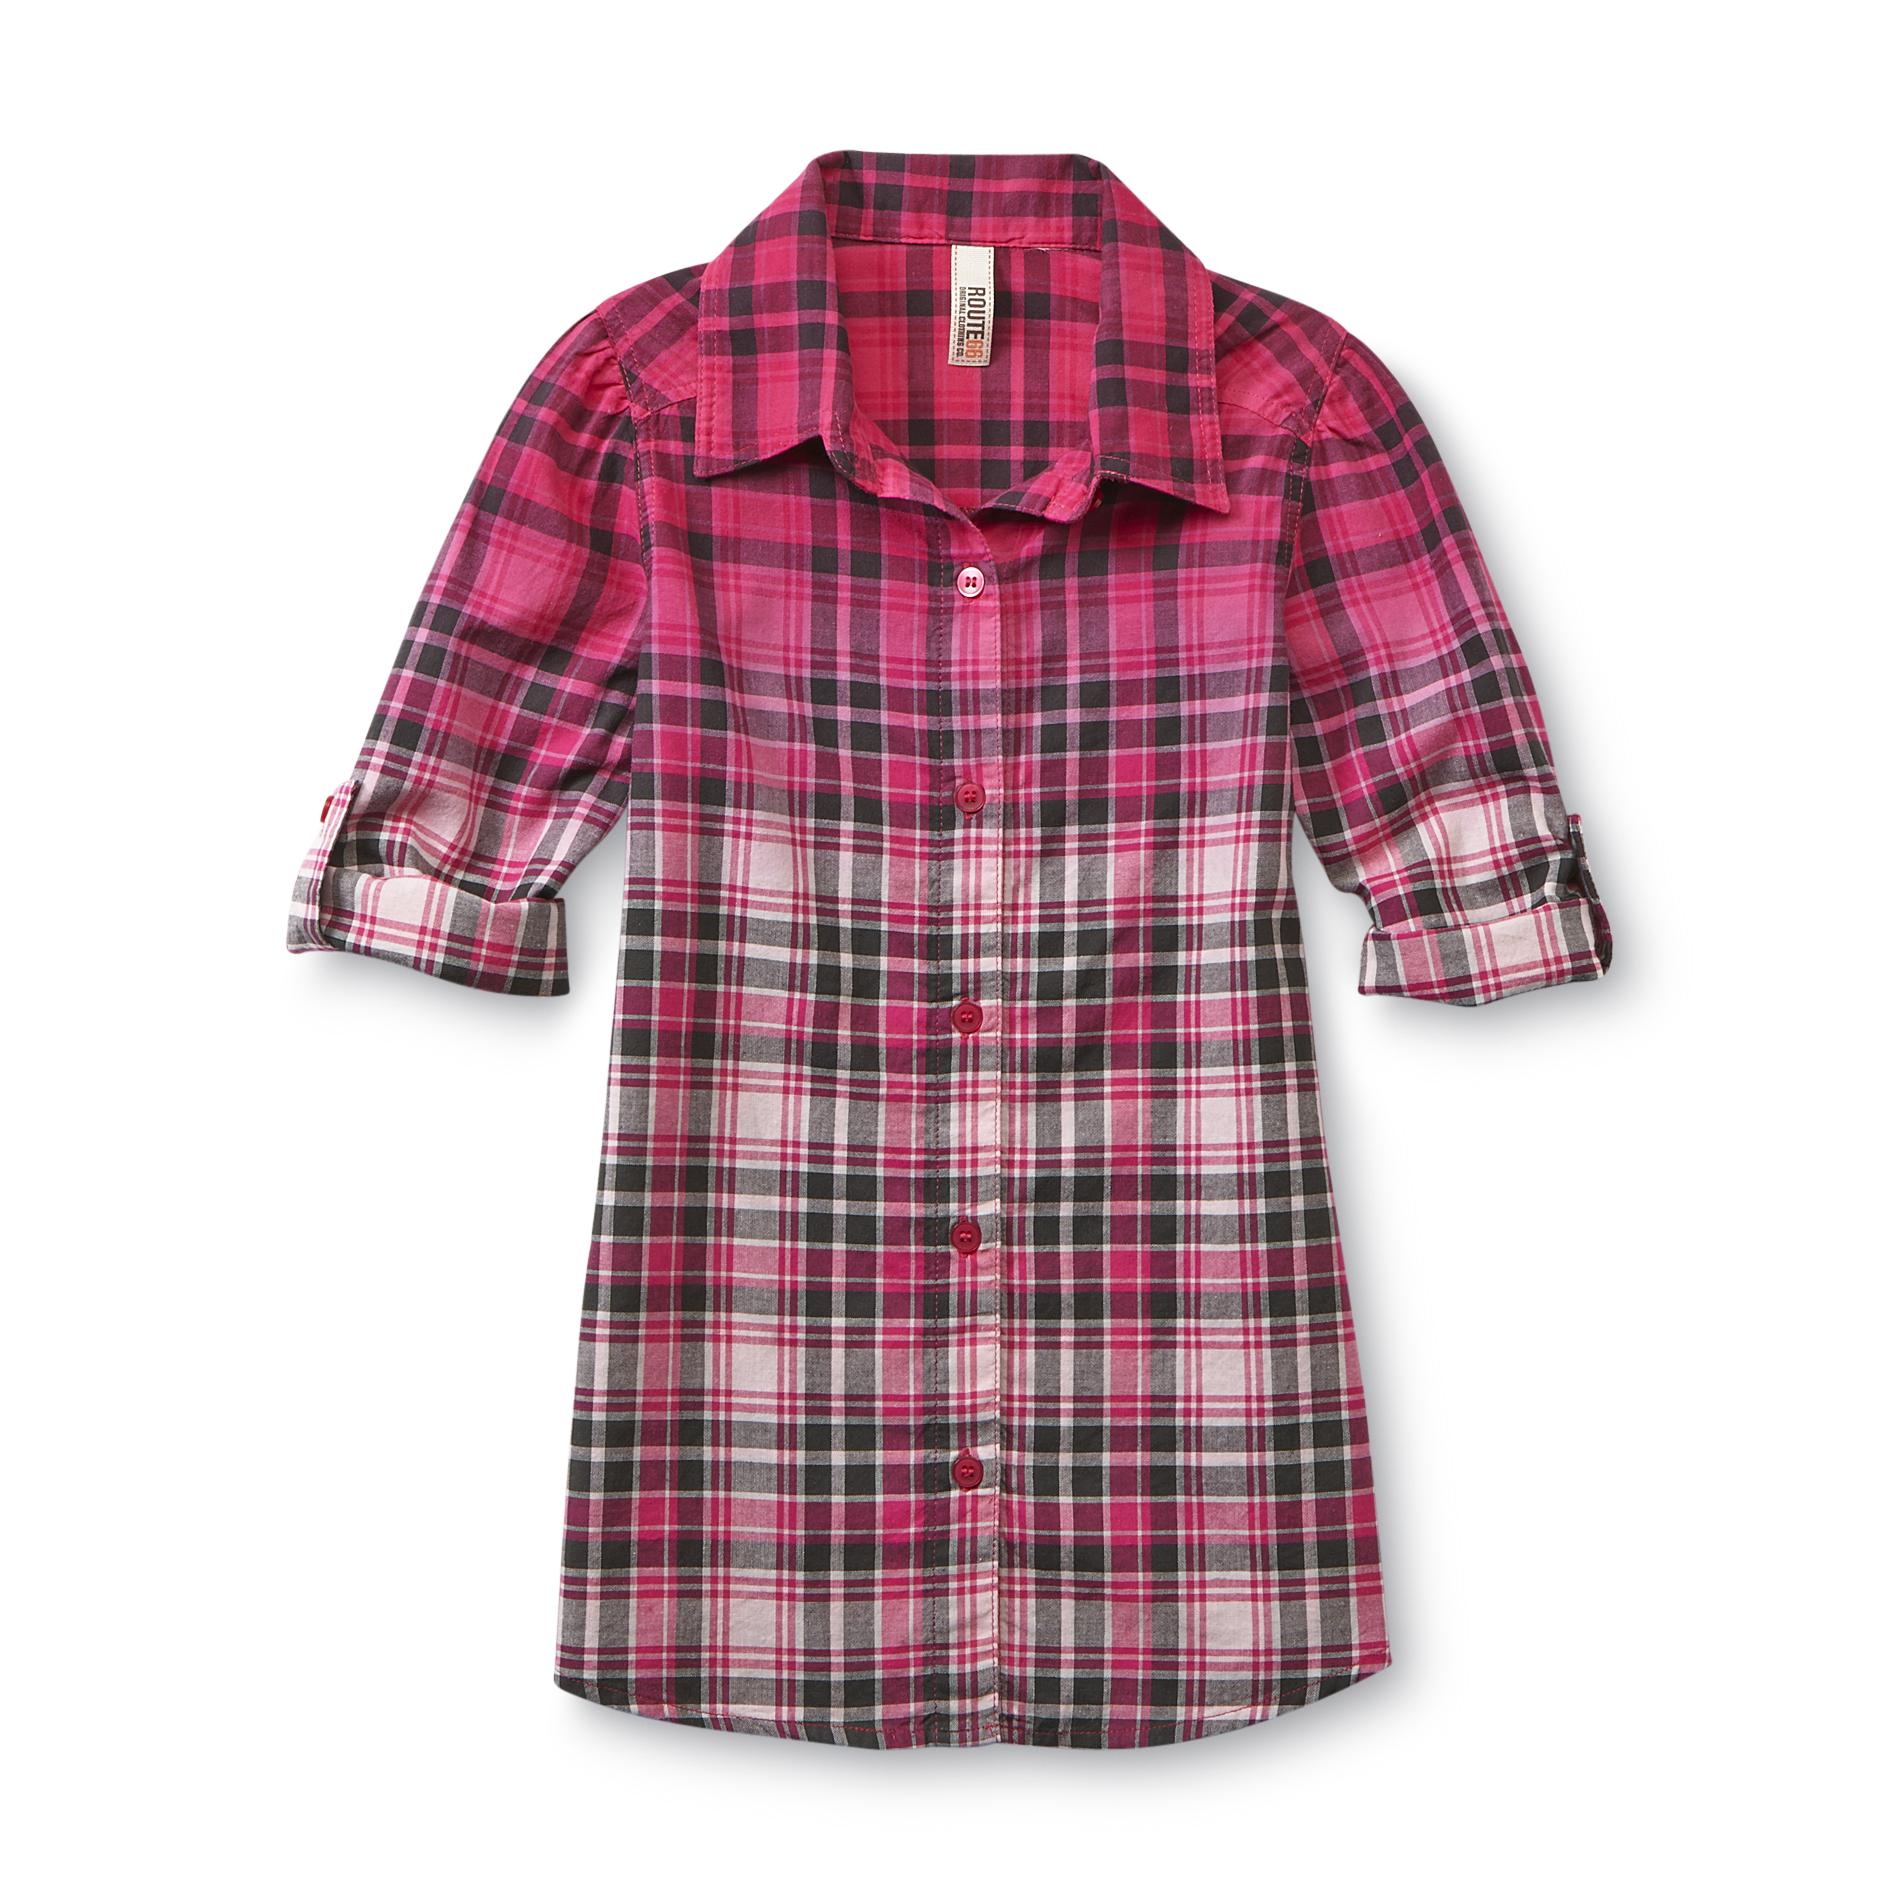 Route 66 Girl's Tab-Sleeve Shirt - Ombre Plaid